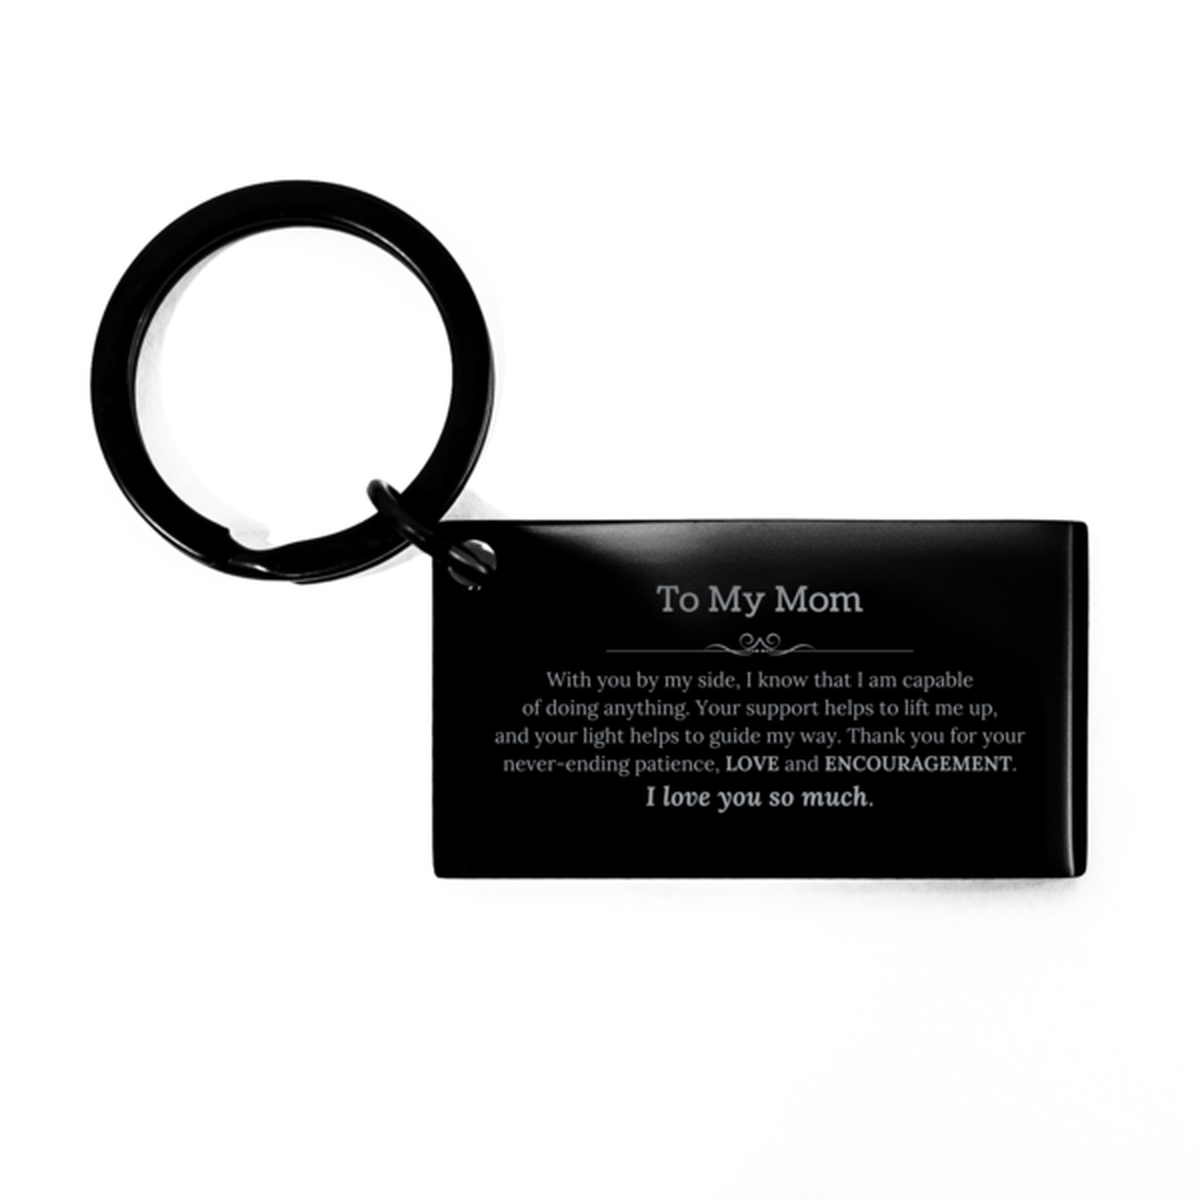 Appreciation Mom Keychain Gifts, To My Mom Birthday Christmas Wedding Keepsake Gifts for Mom With you by my side, I know that I am capable of doing anything. I love you so much